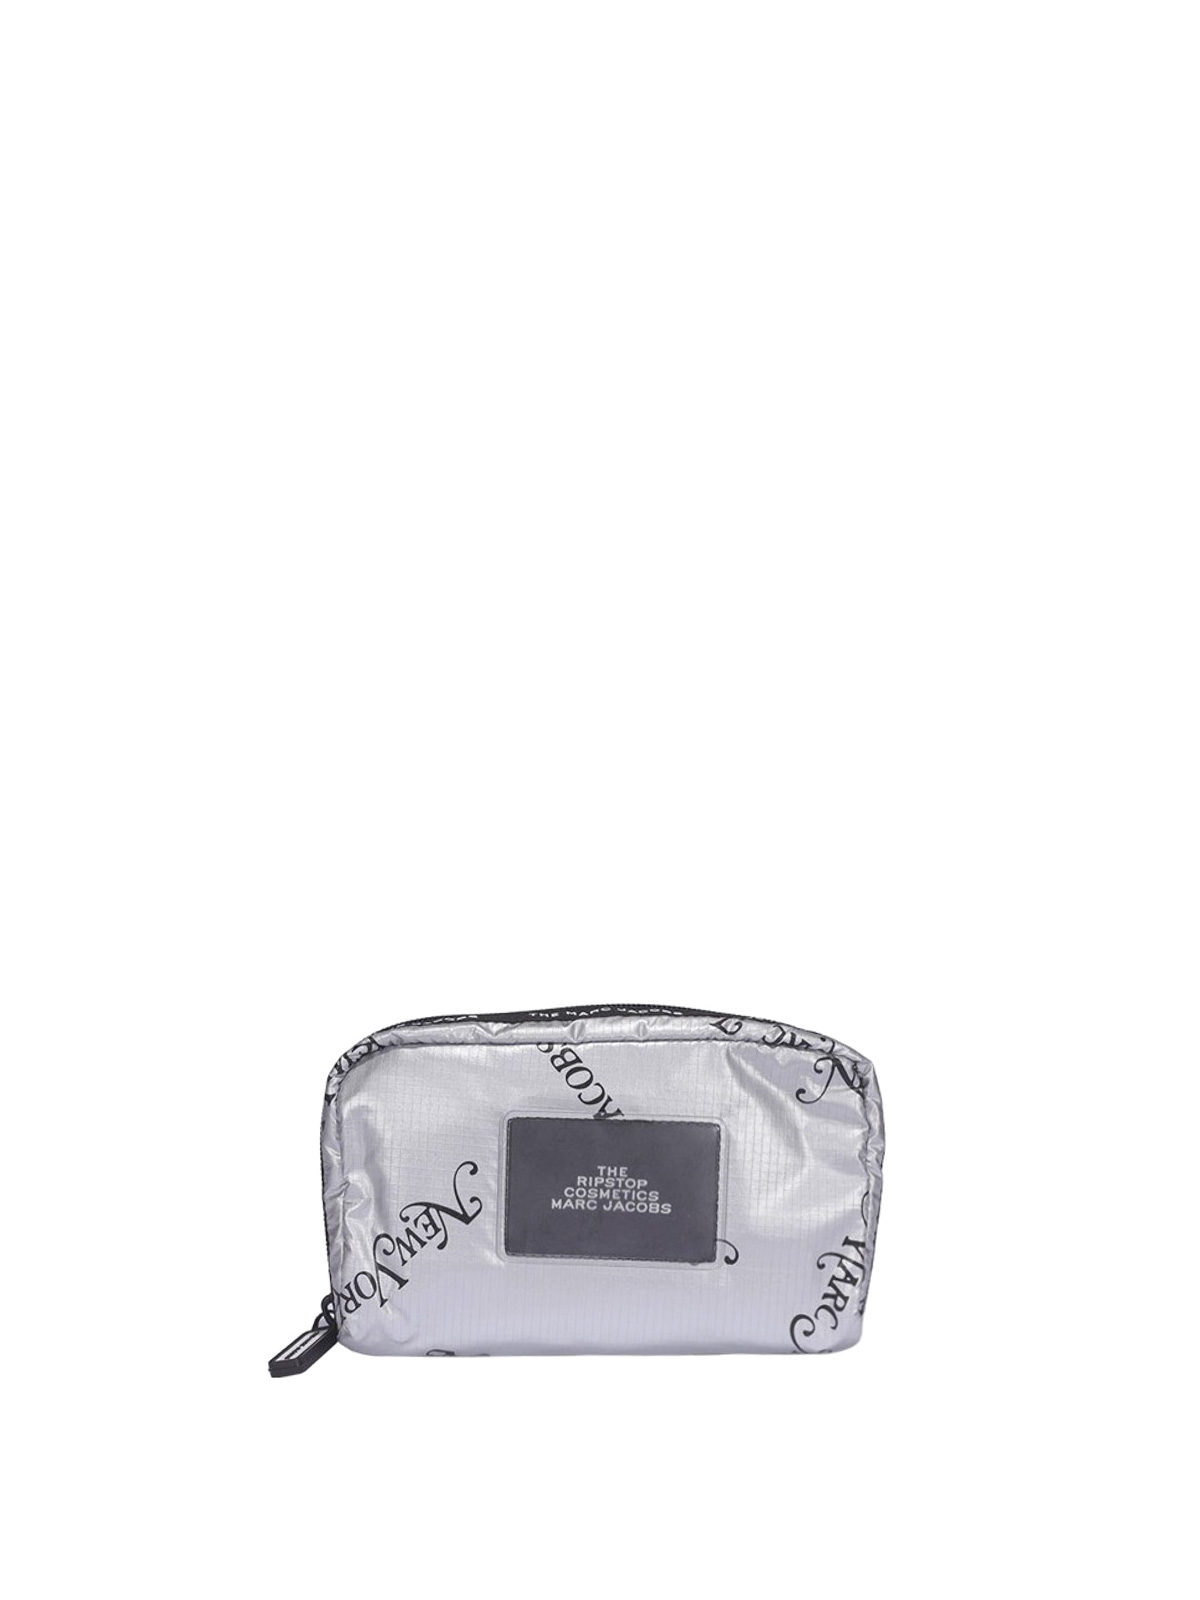 MARC JACOBS NEW YORK MAGAZINE® THE RIPSTOP COSMETIC BAG